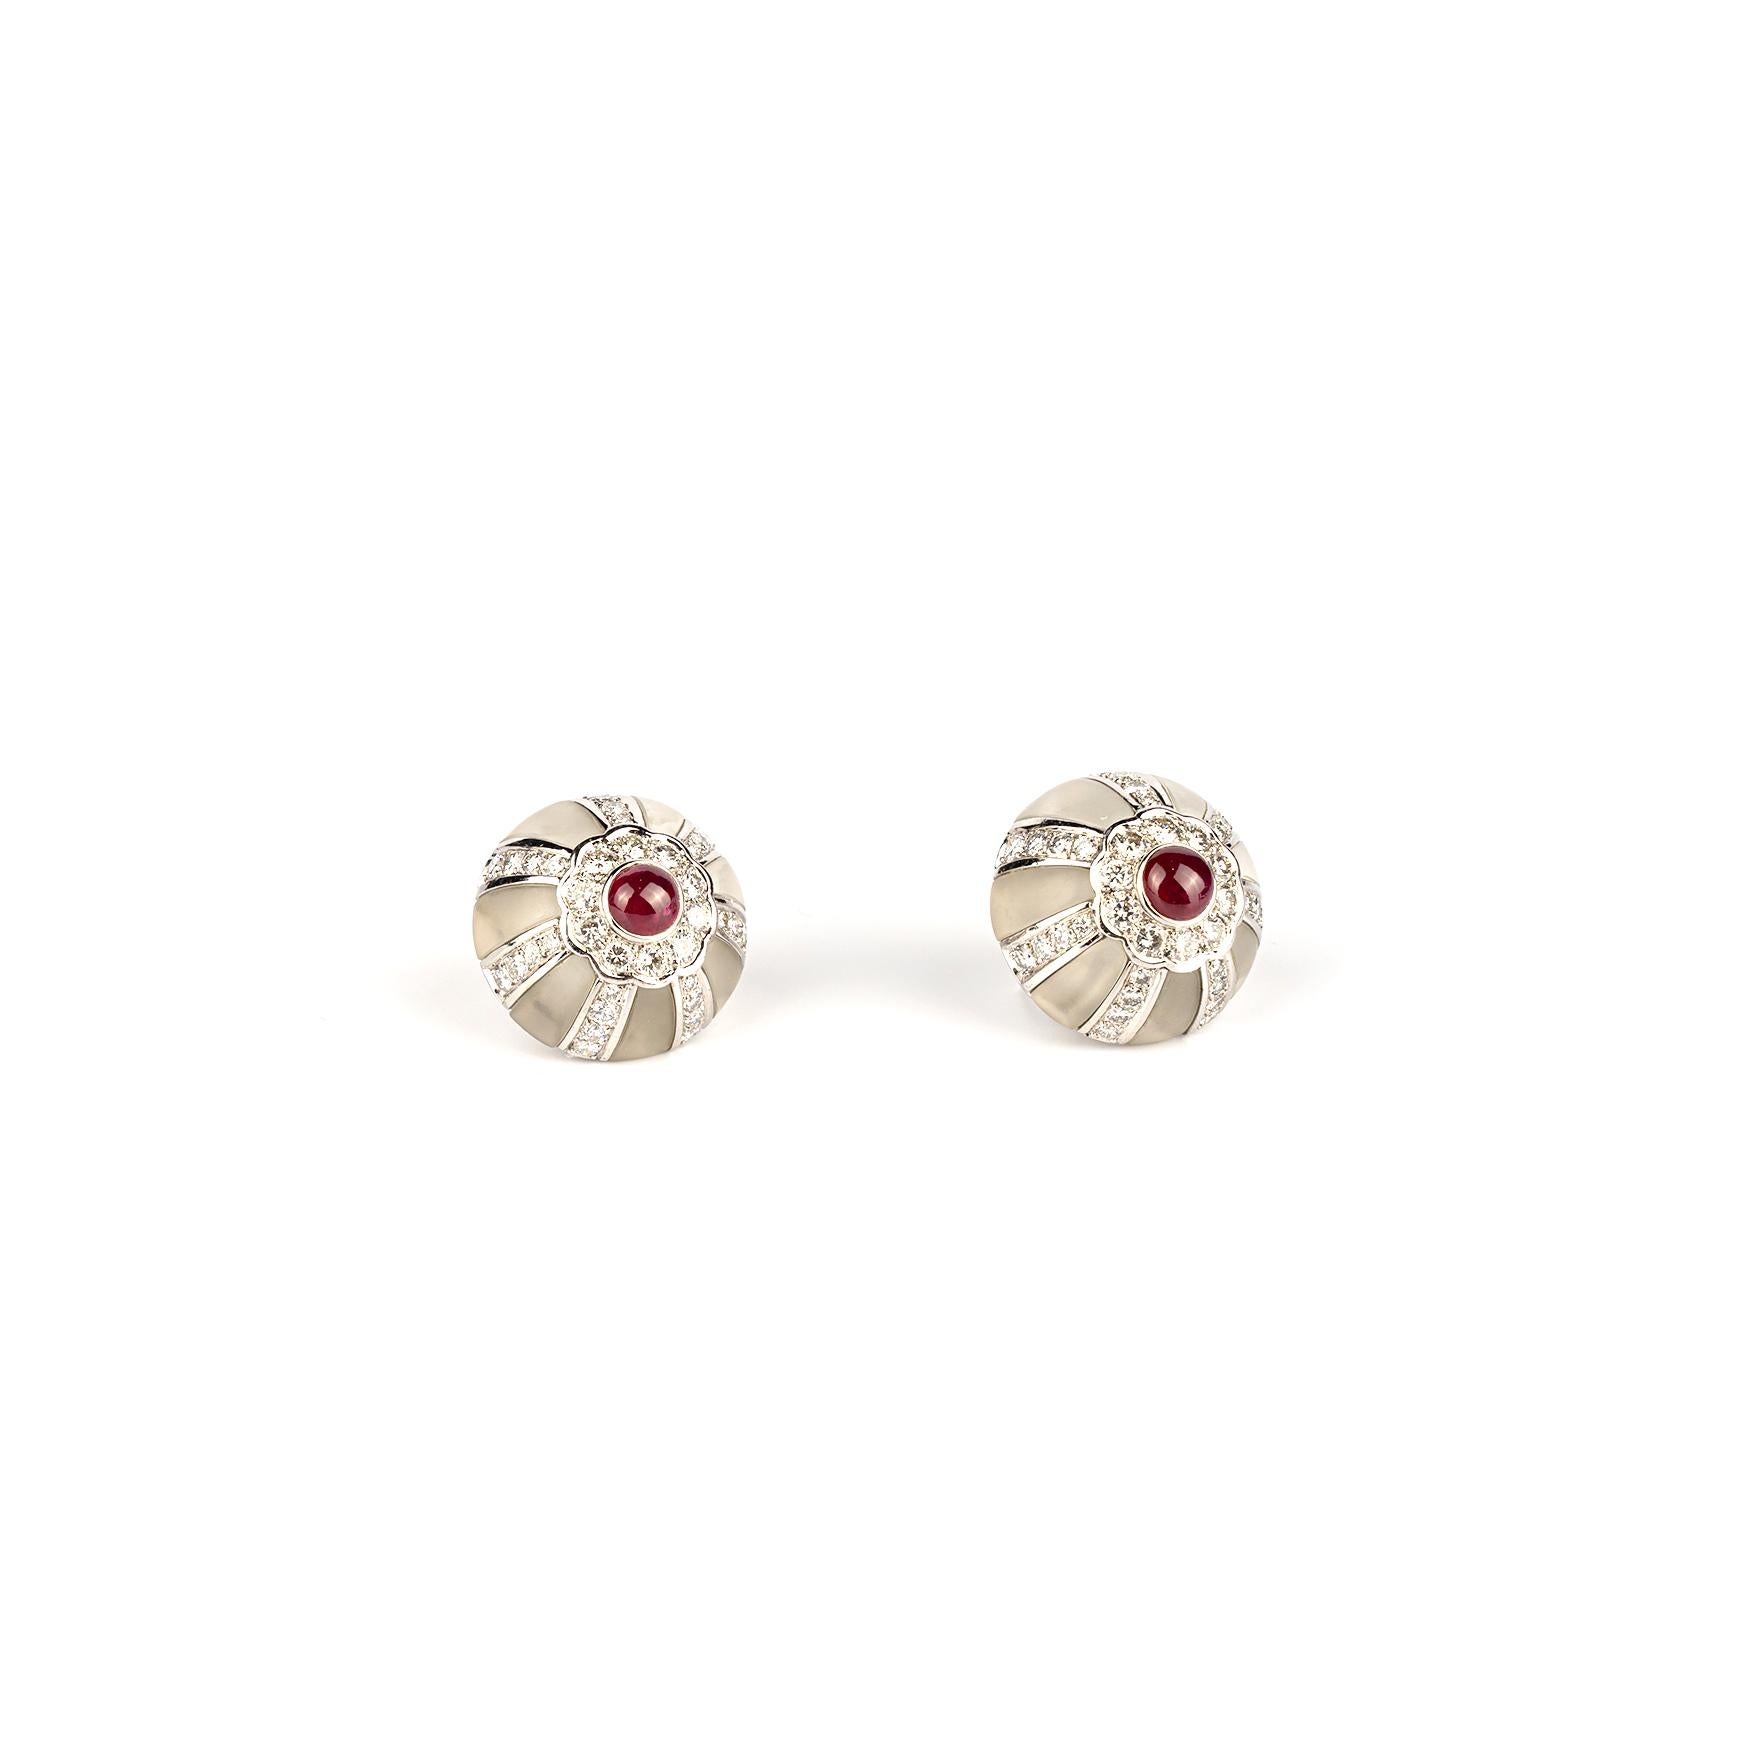 An elegant pair of rock crystal and ruby stud earrings mounted on white gold. Made in America, circa 1970.